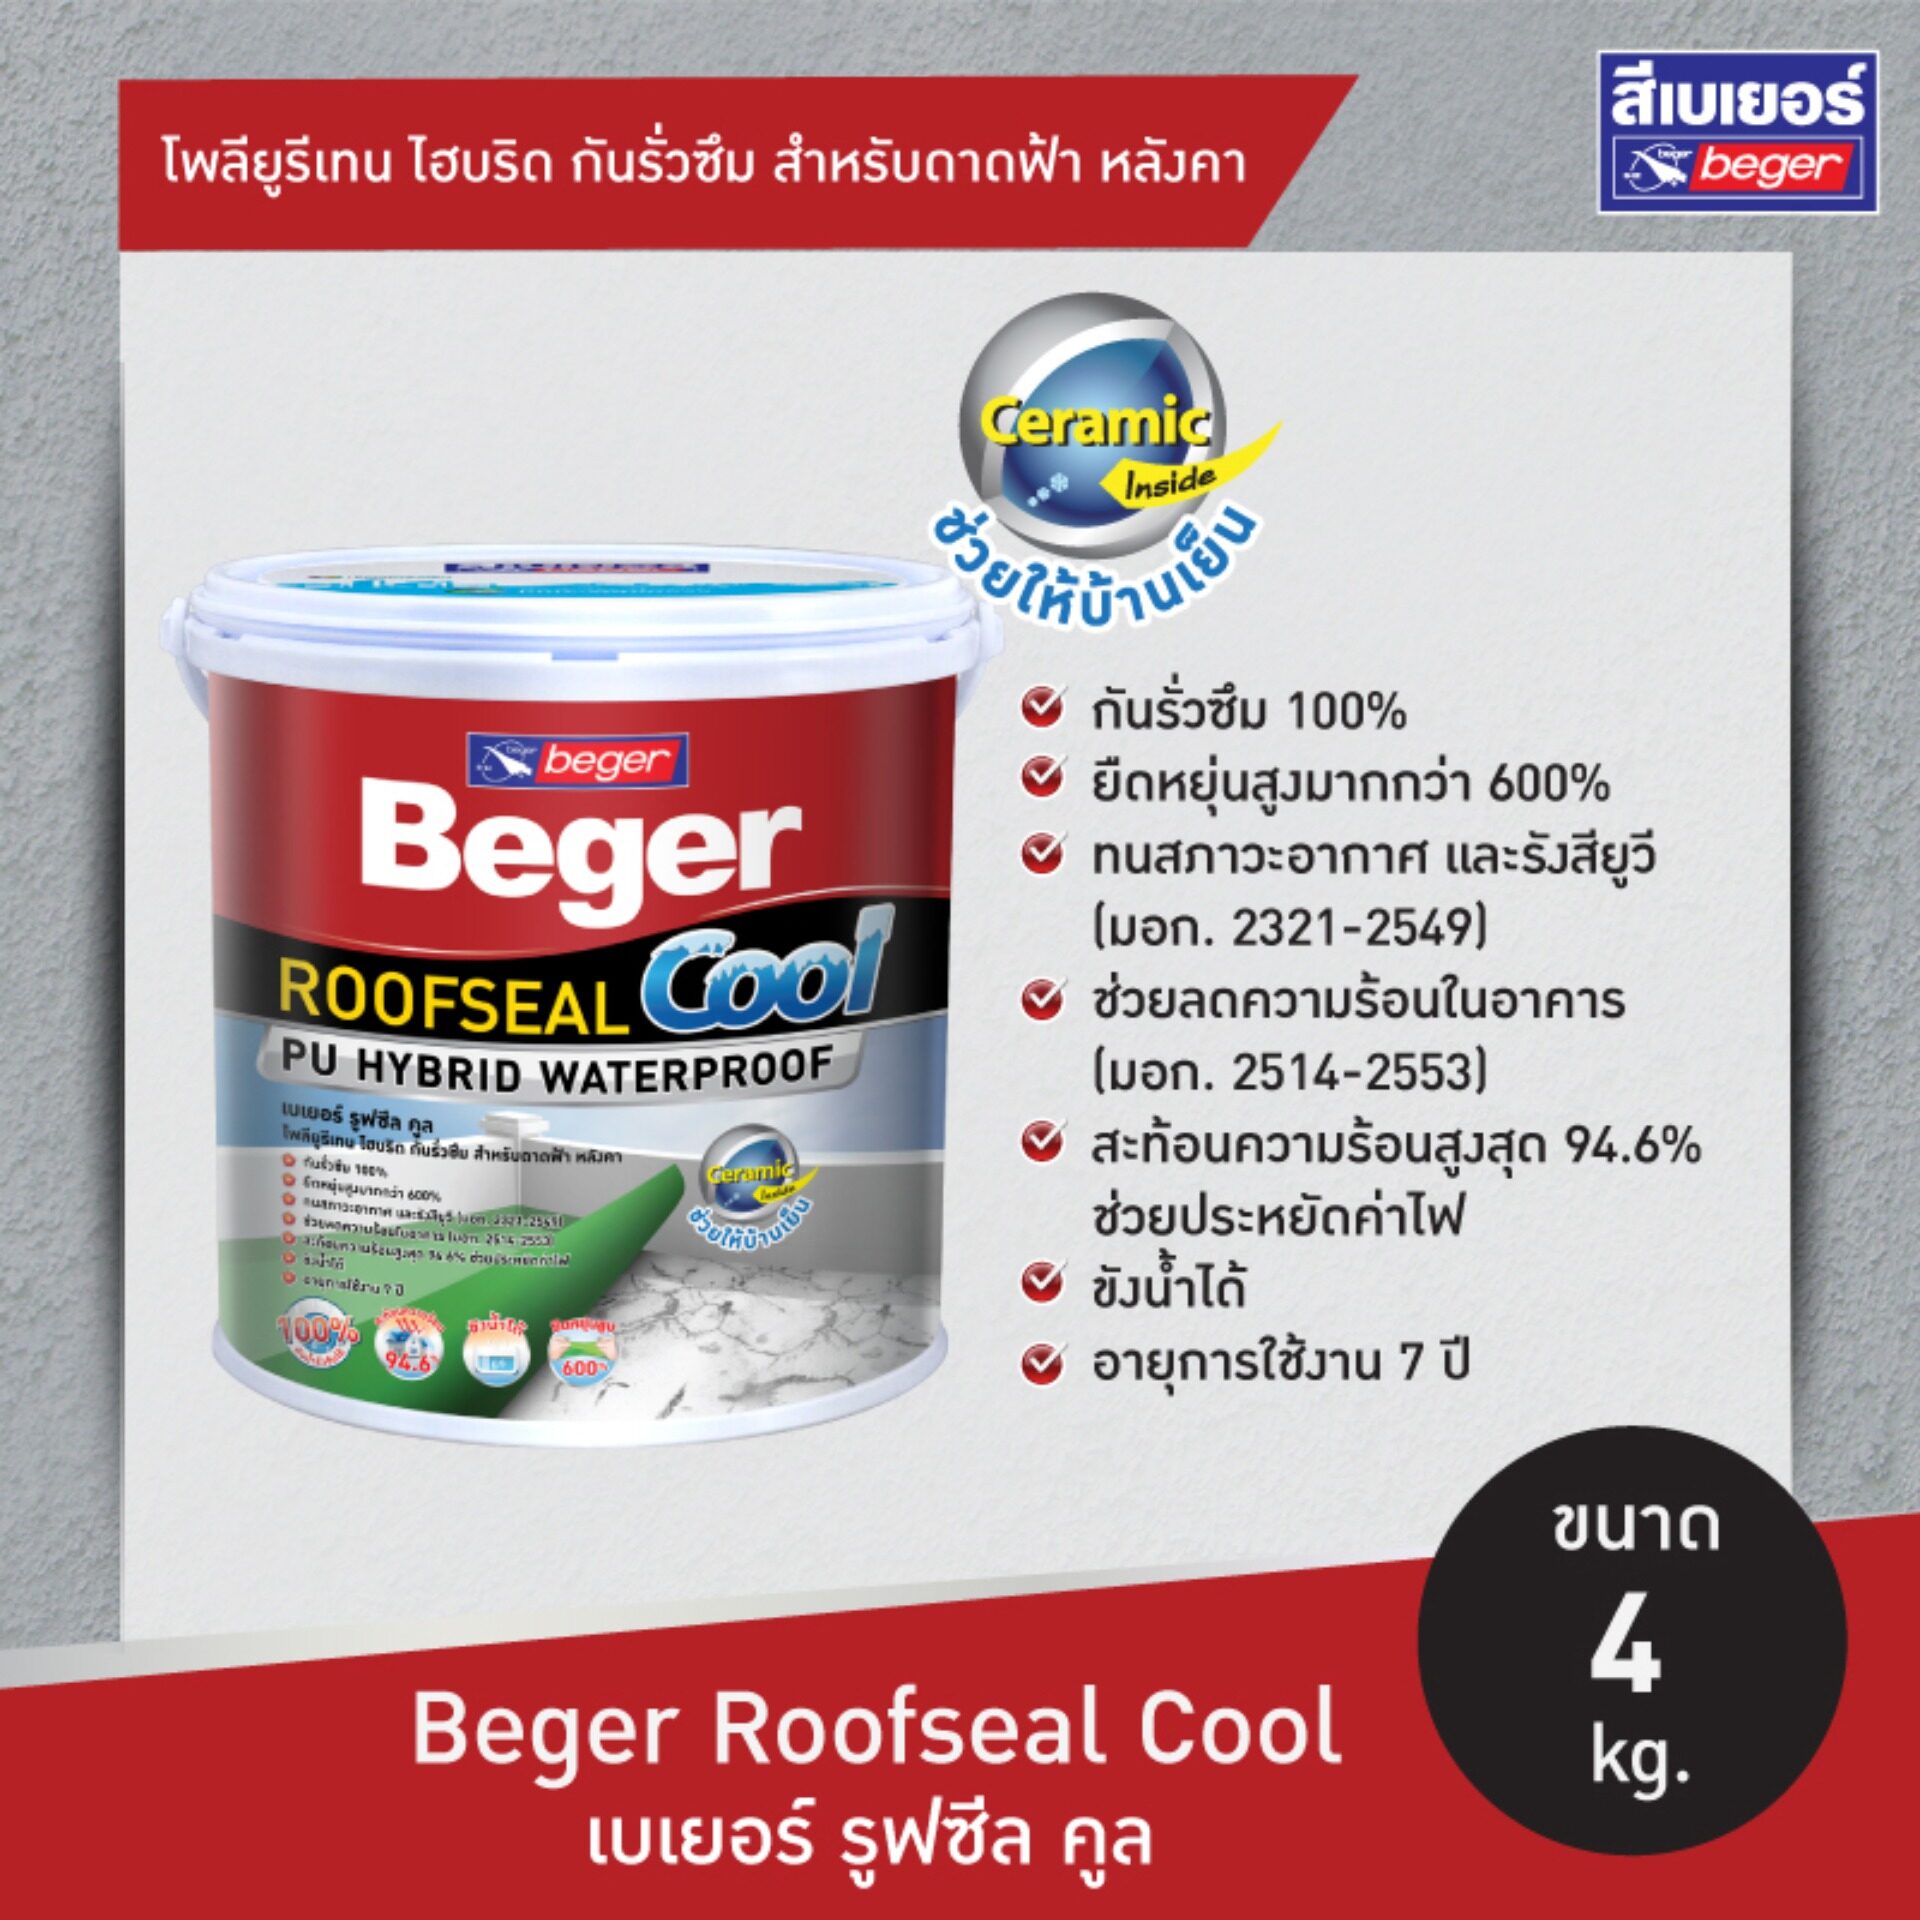 Beger Roofseal Cool (4 KG.) สี # 206 (Green)